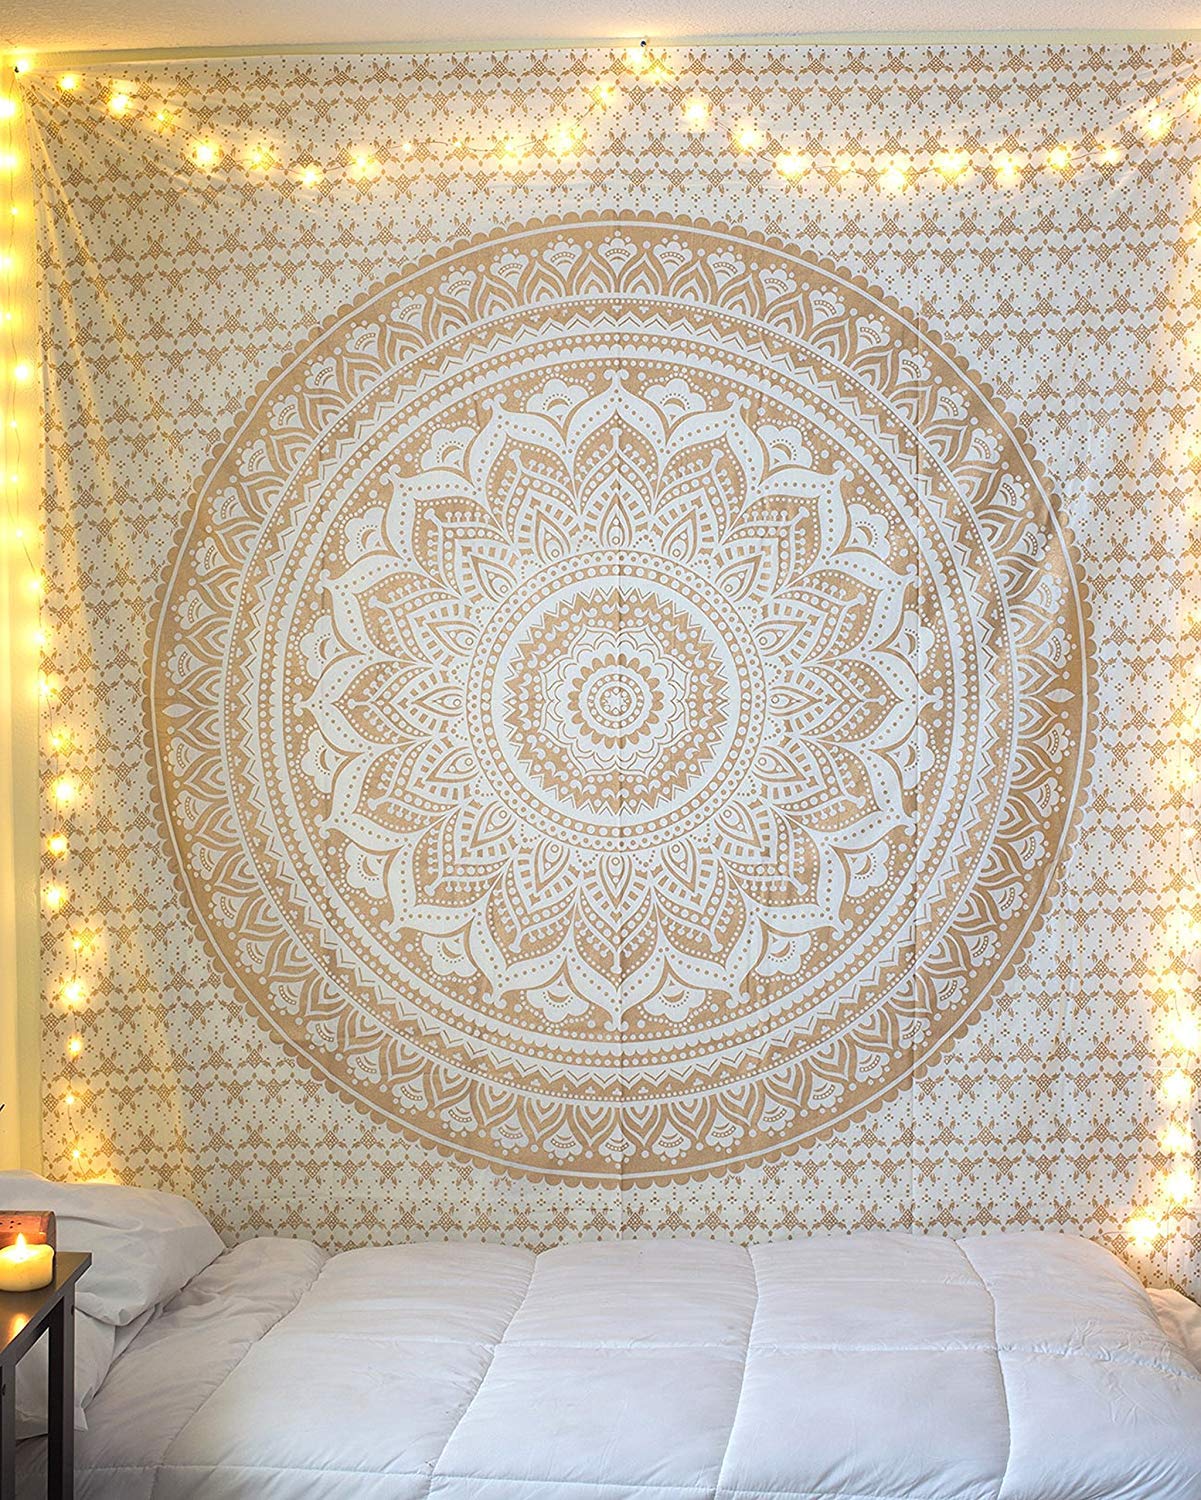 Mandala Tapestry Flowers Wall Hanging Print Bedspread Gold White Bedroom Decor 